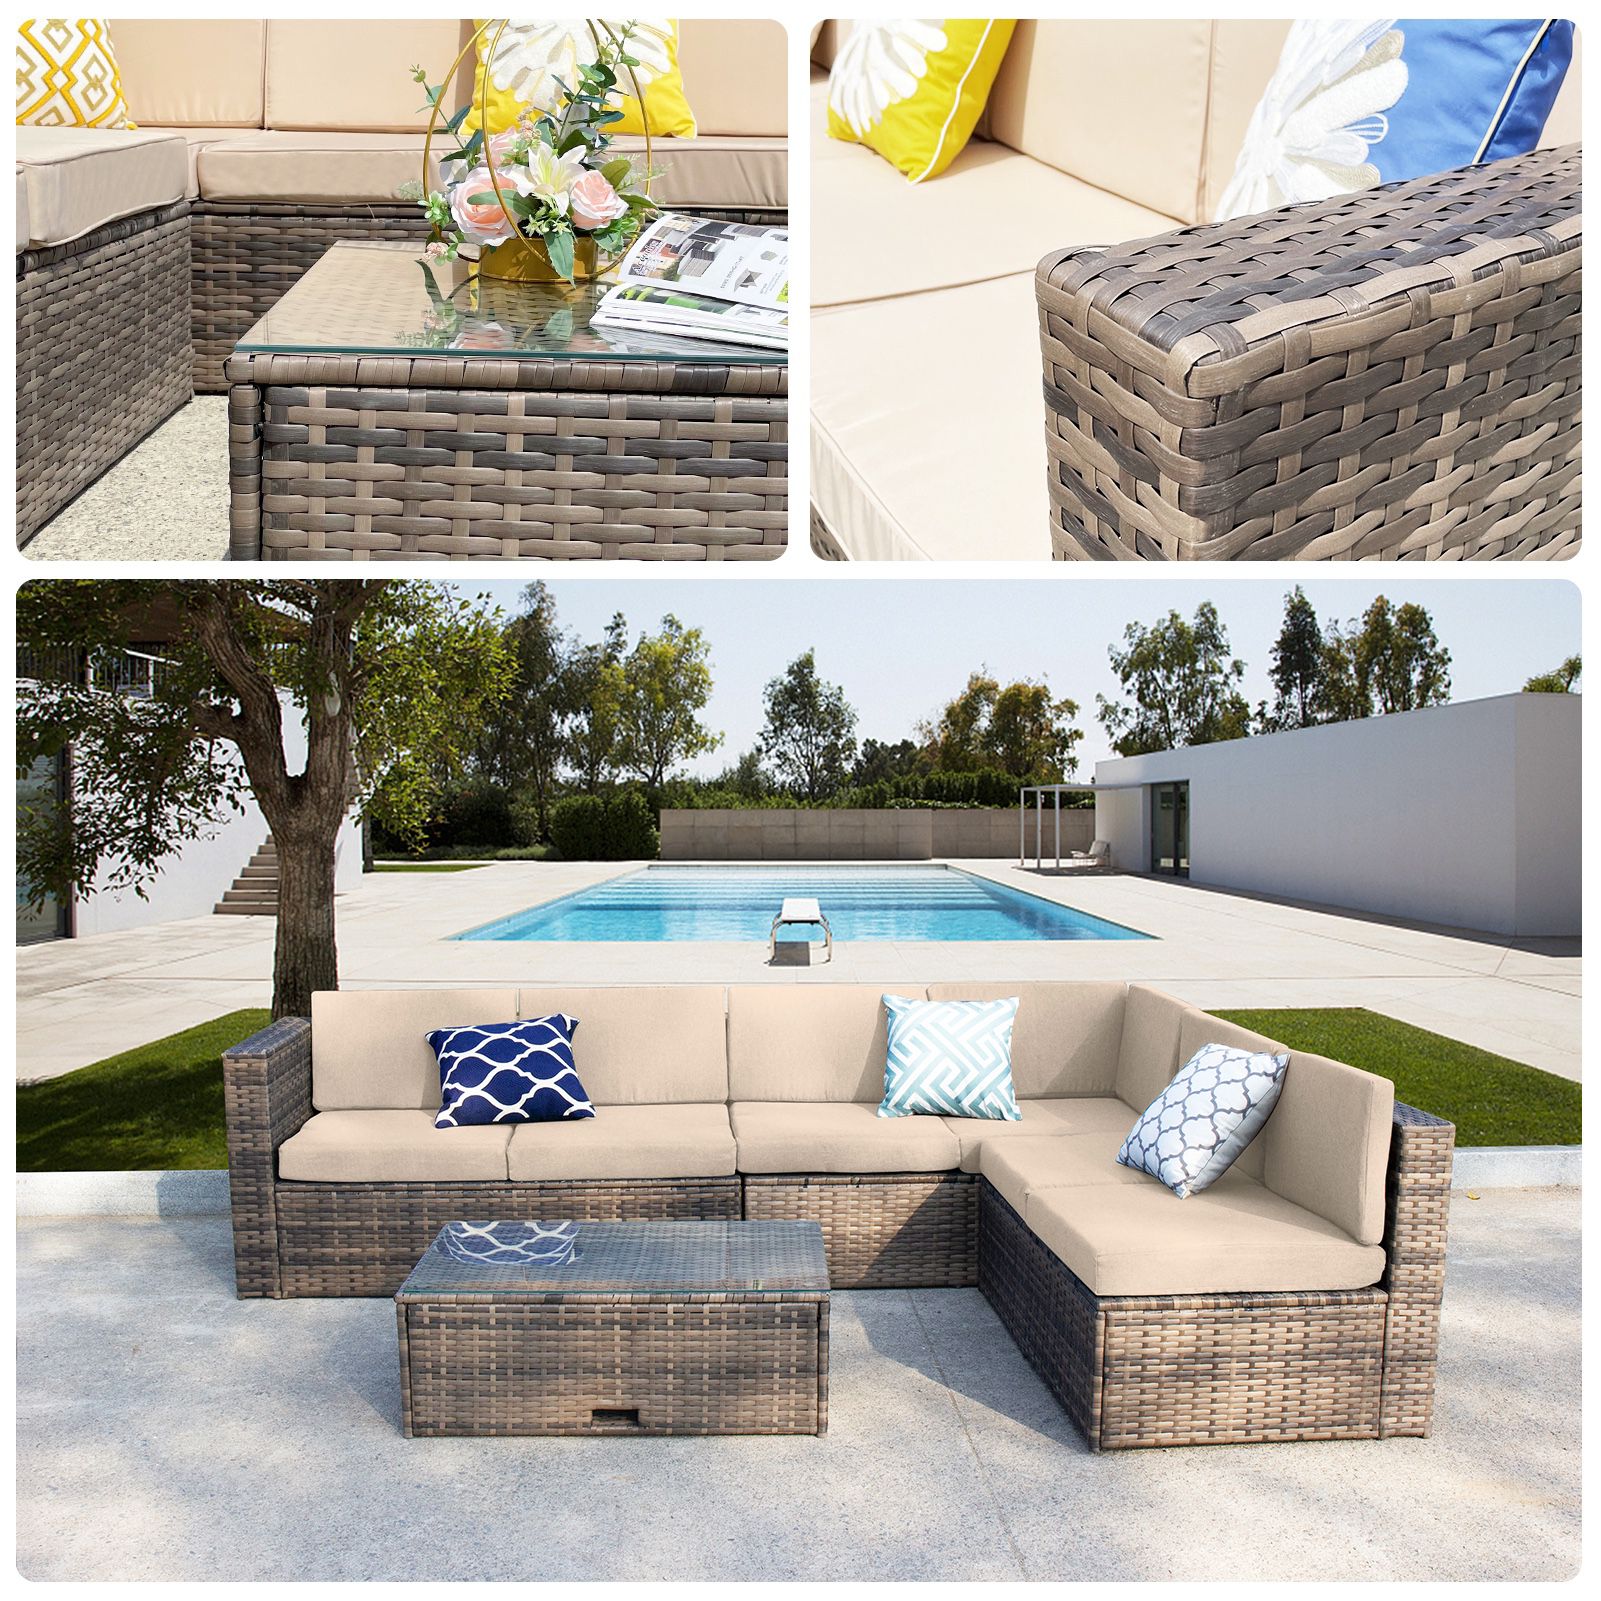 Clearance Sale !! Outdoor Patio Furniture- wicker Sofa Set. Brand new in  the box!!!! Cash Only. Pick up At San Bernardino, 92407. for Sale in  Fontana, CA - OfferUp